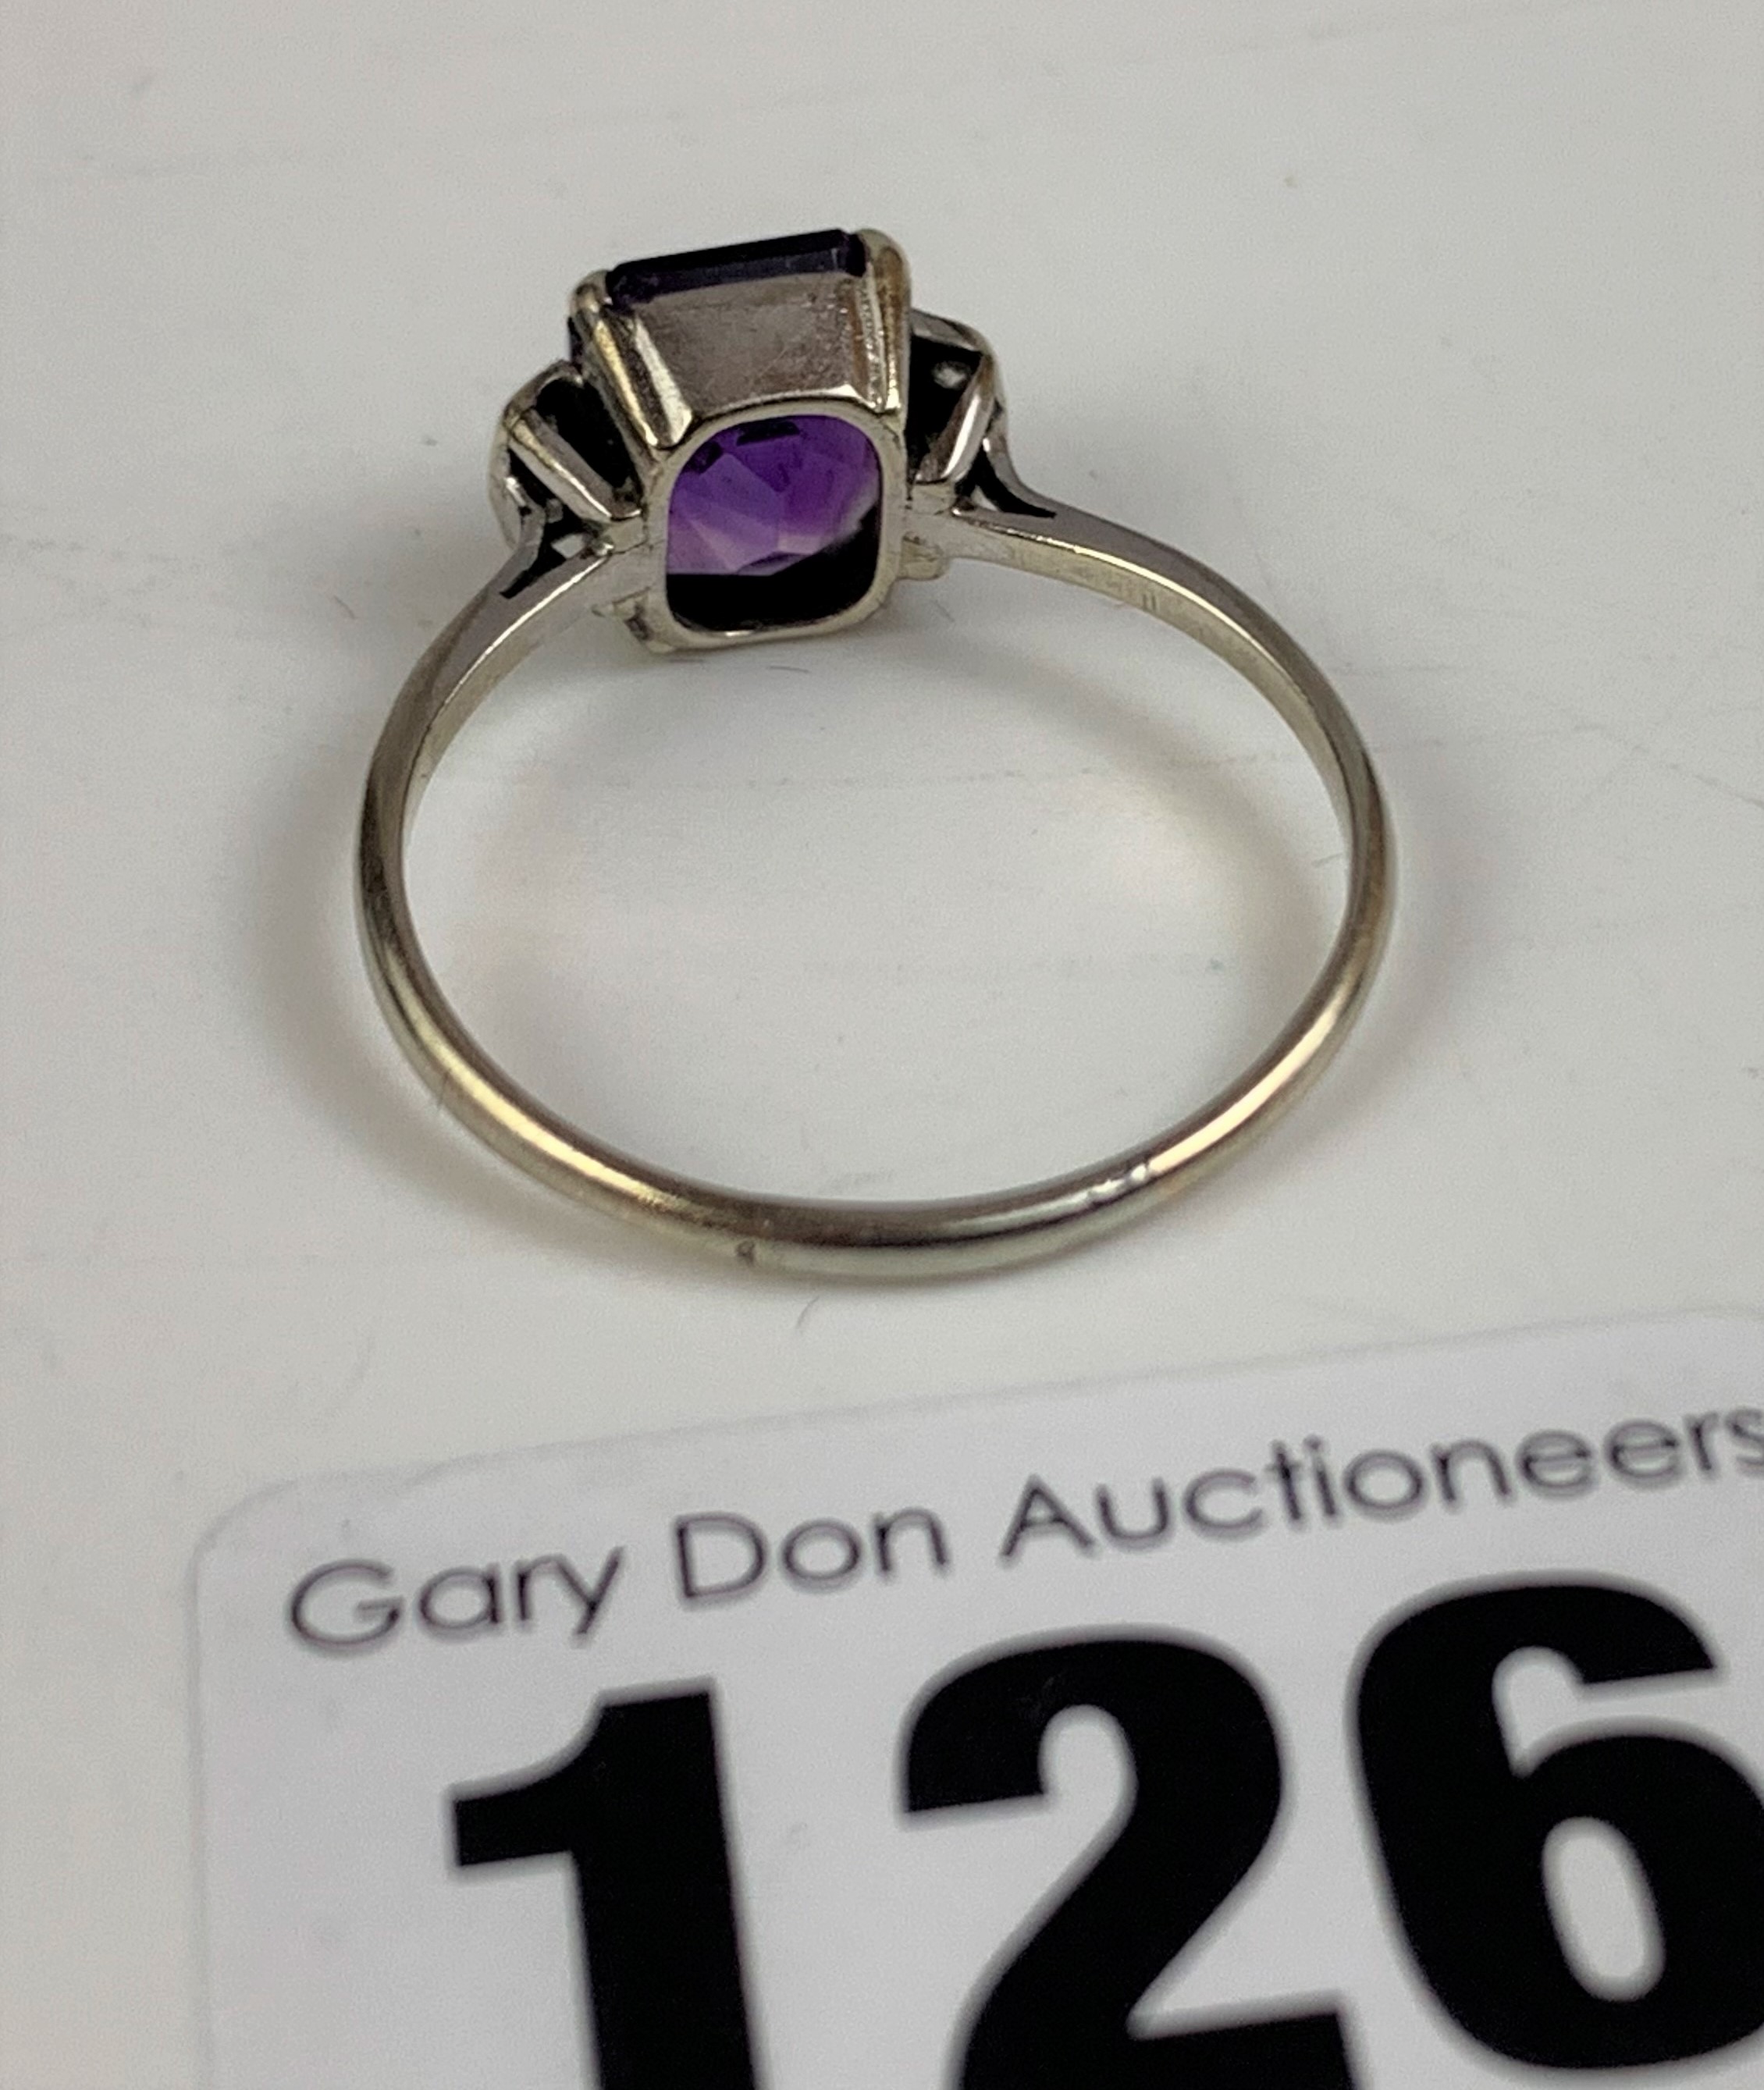 9k gold and purple stone ring, size R/S, w: 2.1 gms - Image 4 of 6